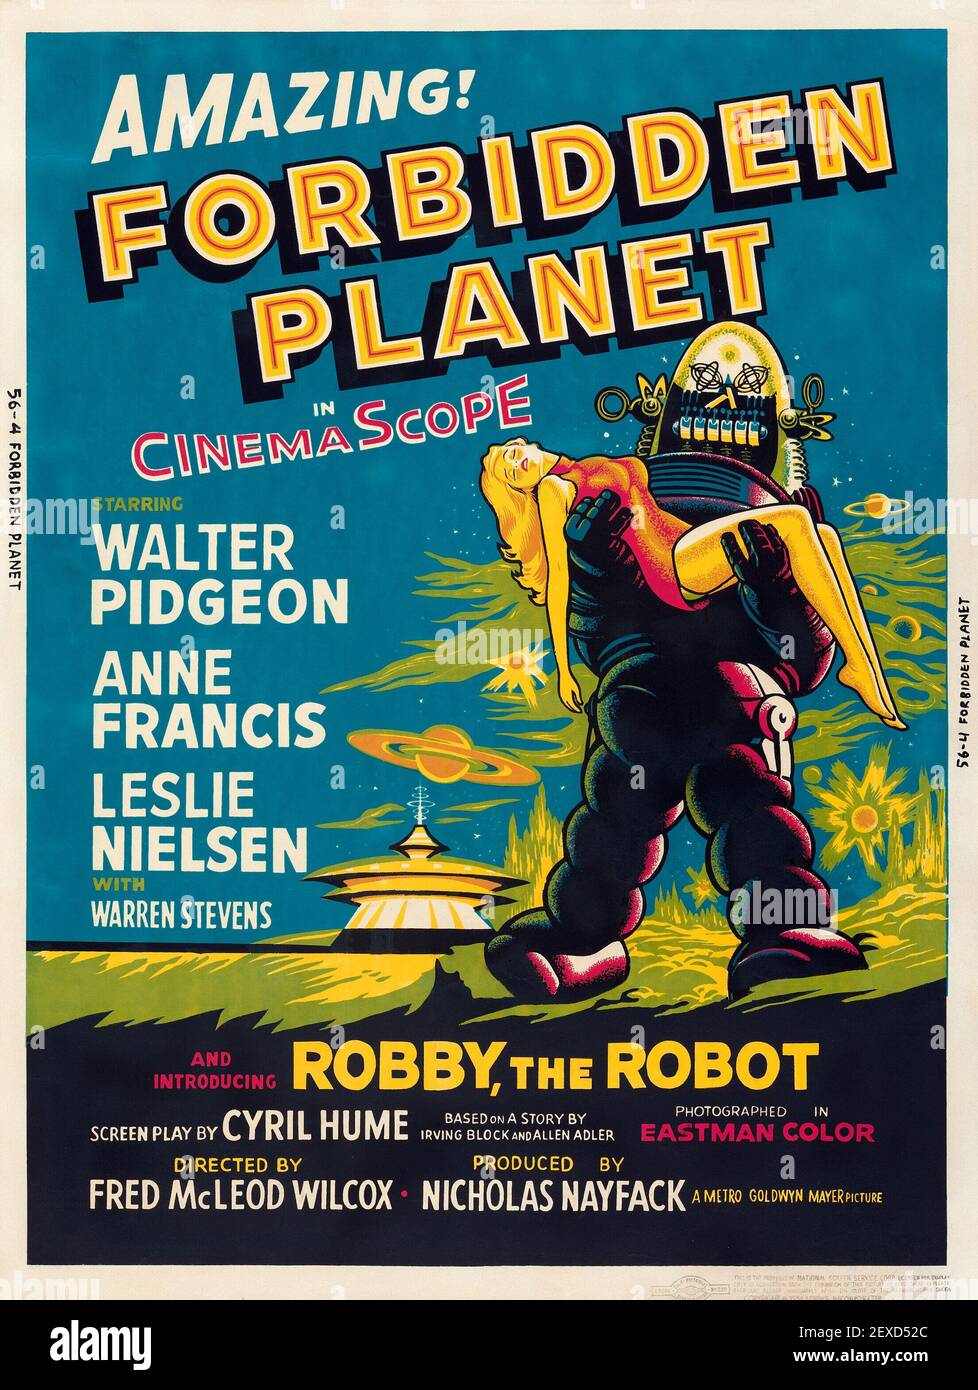 Forbidden Planet 1956 Vintage Science Fiction Movie Poster #38